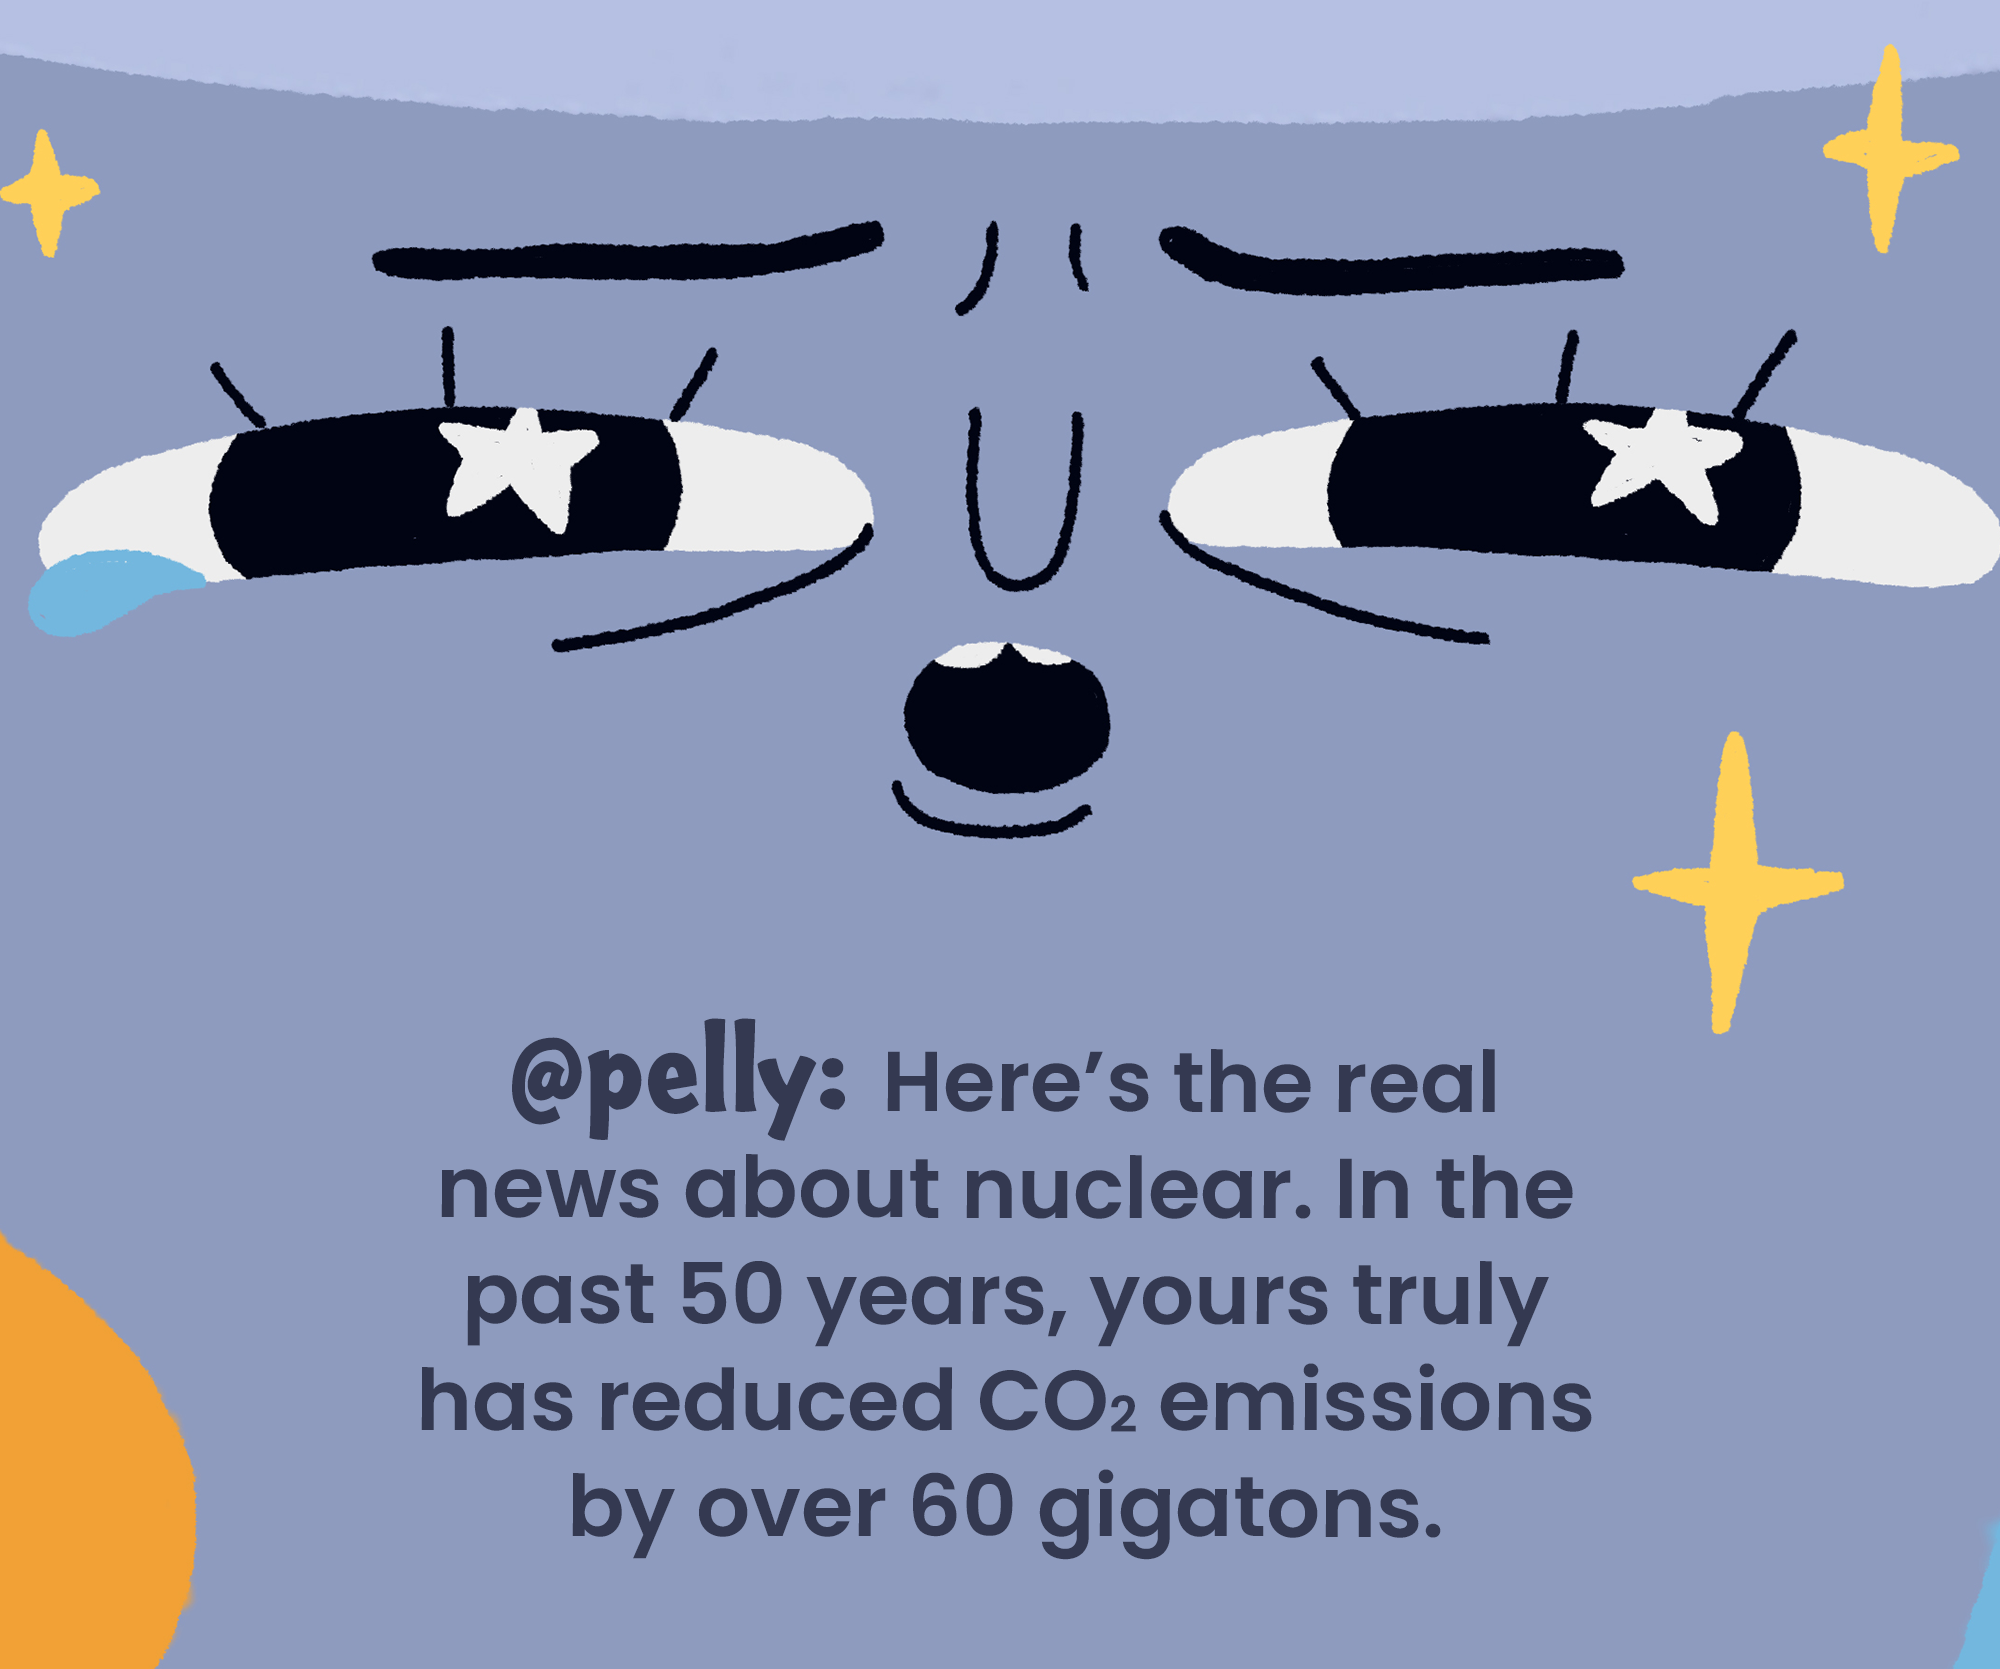 @pelly: Here’s the real news about nuclear. In the past 50 years, yours truly has reduced CO2 emissions by over 60 gigatons.